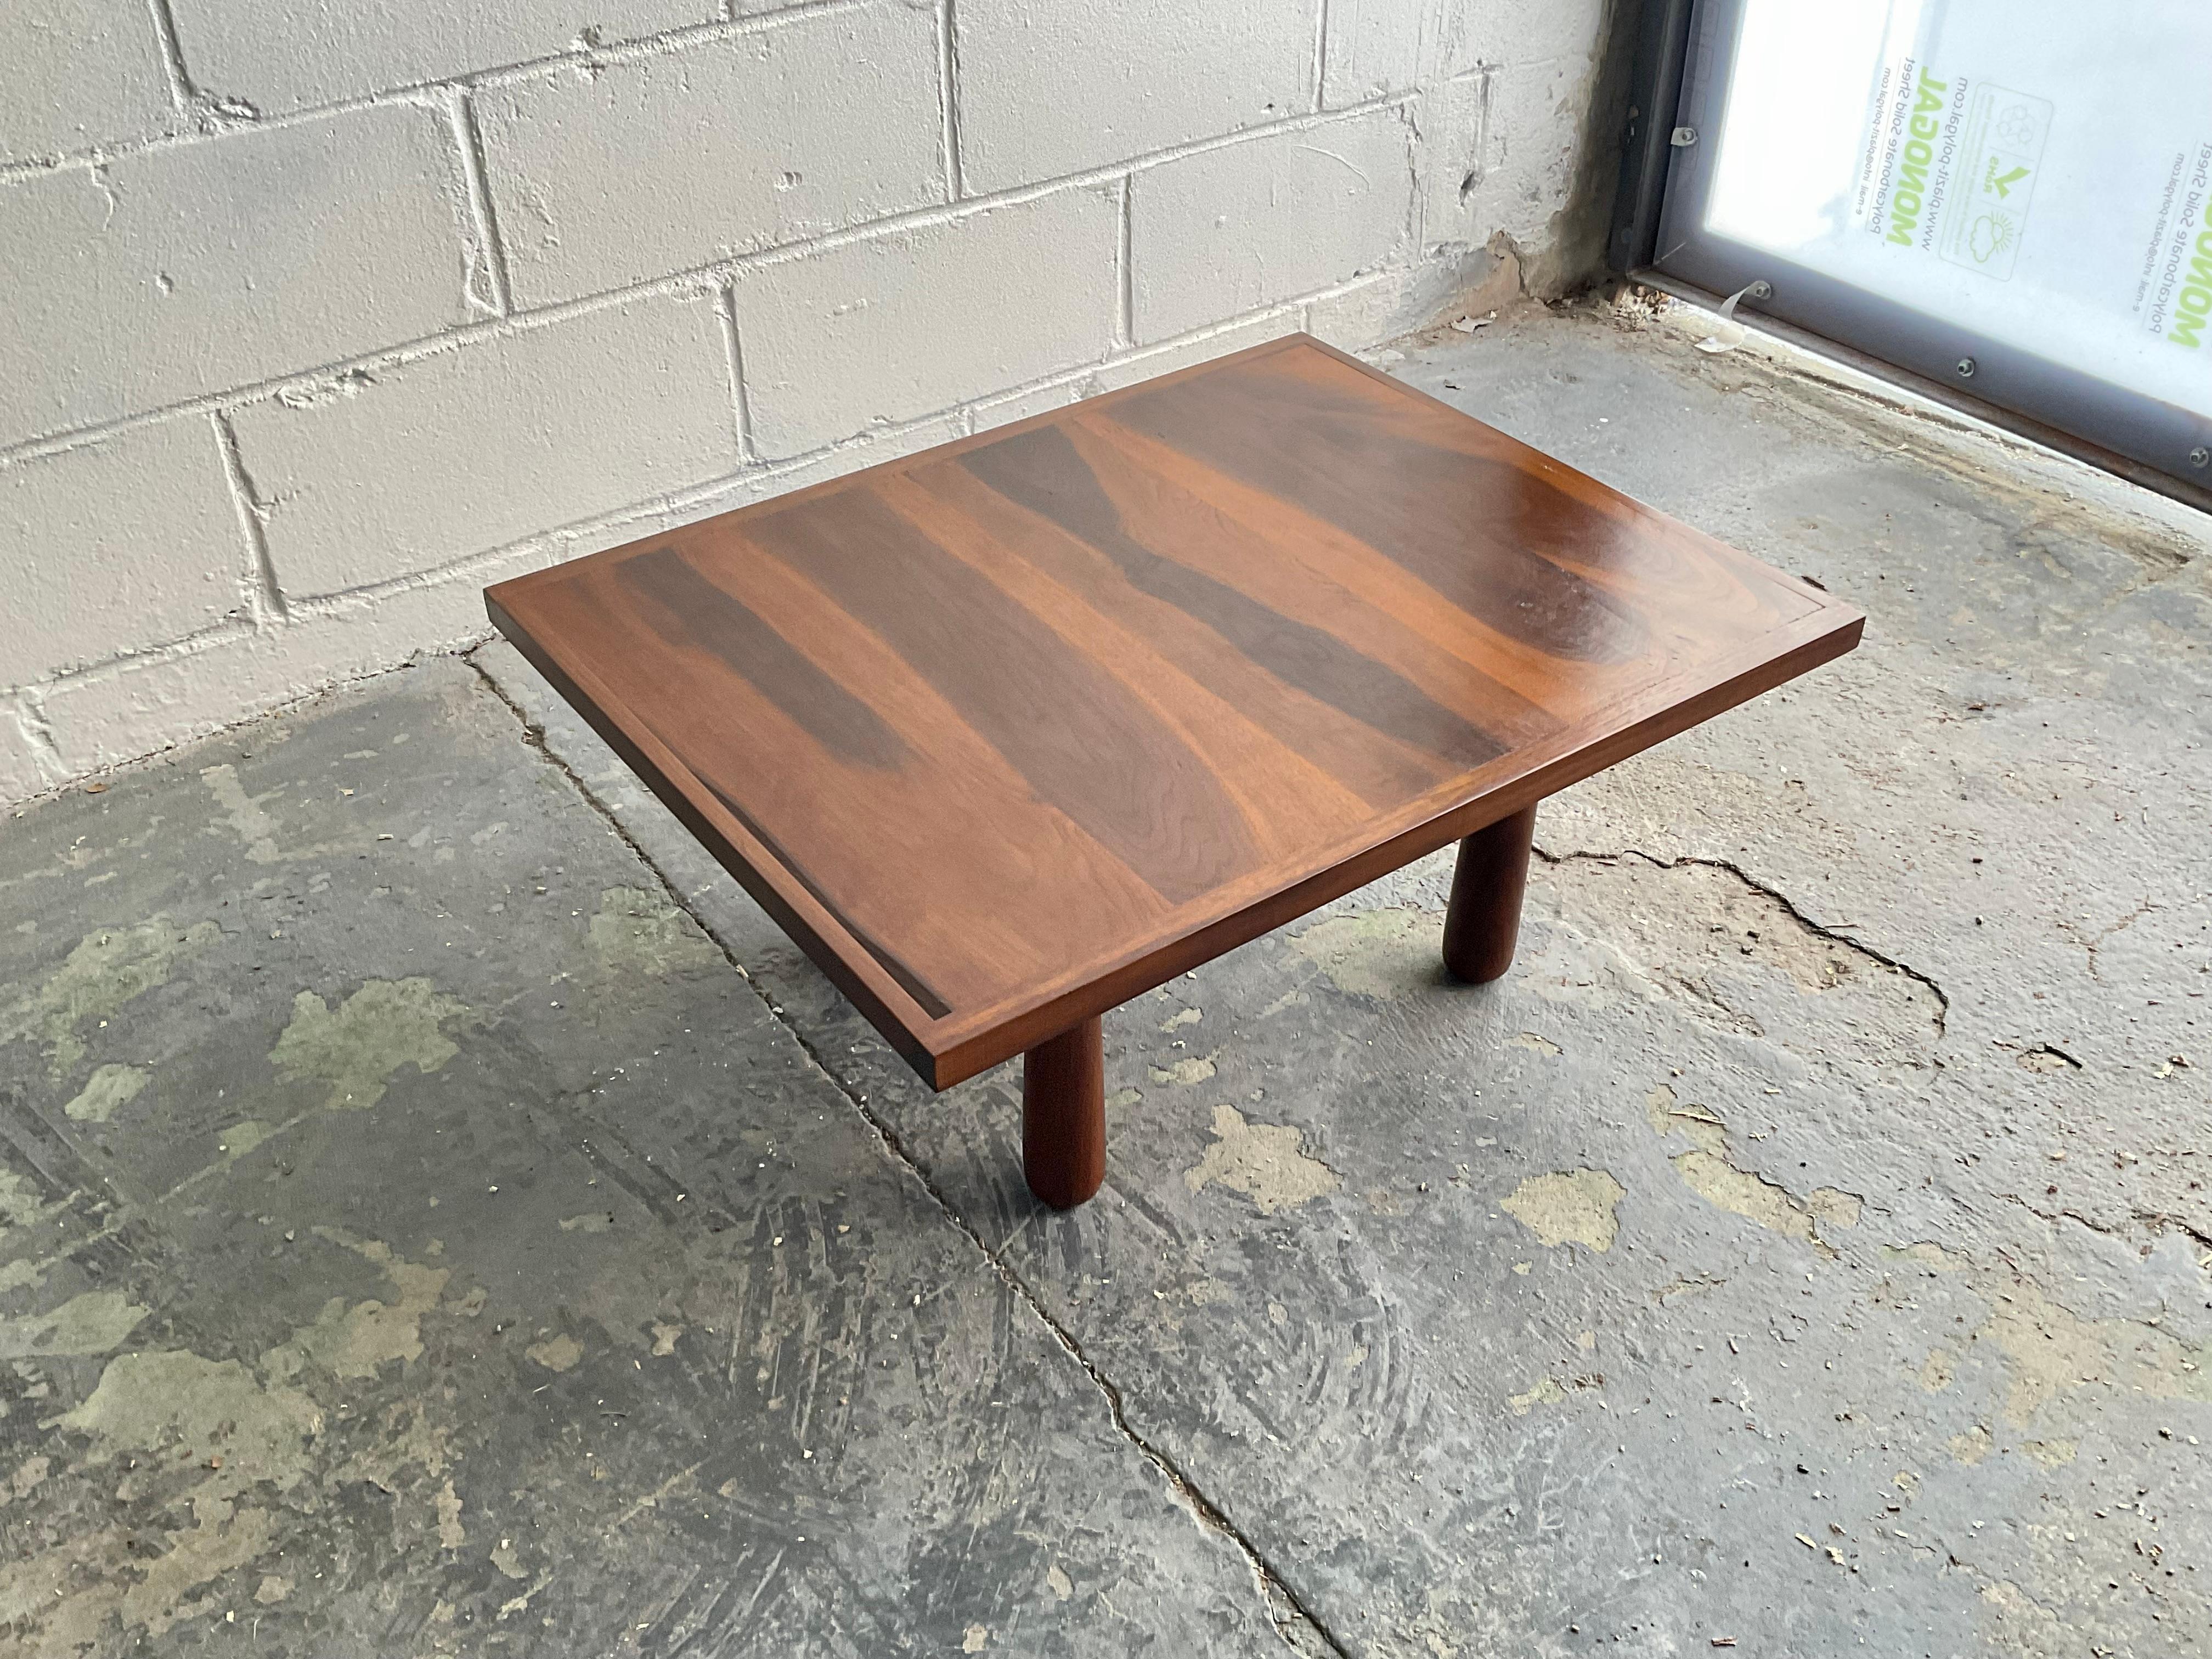 Polished Handmade “Oikado” Low Table in Black Walnut by Montaperto Studios, 2023 For Sale